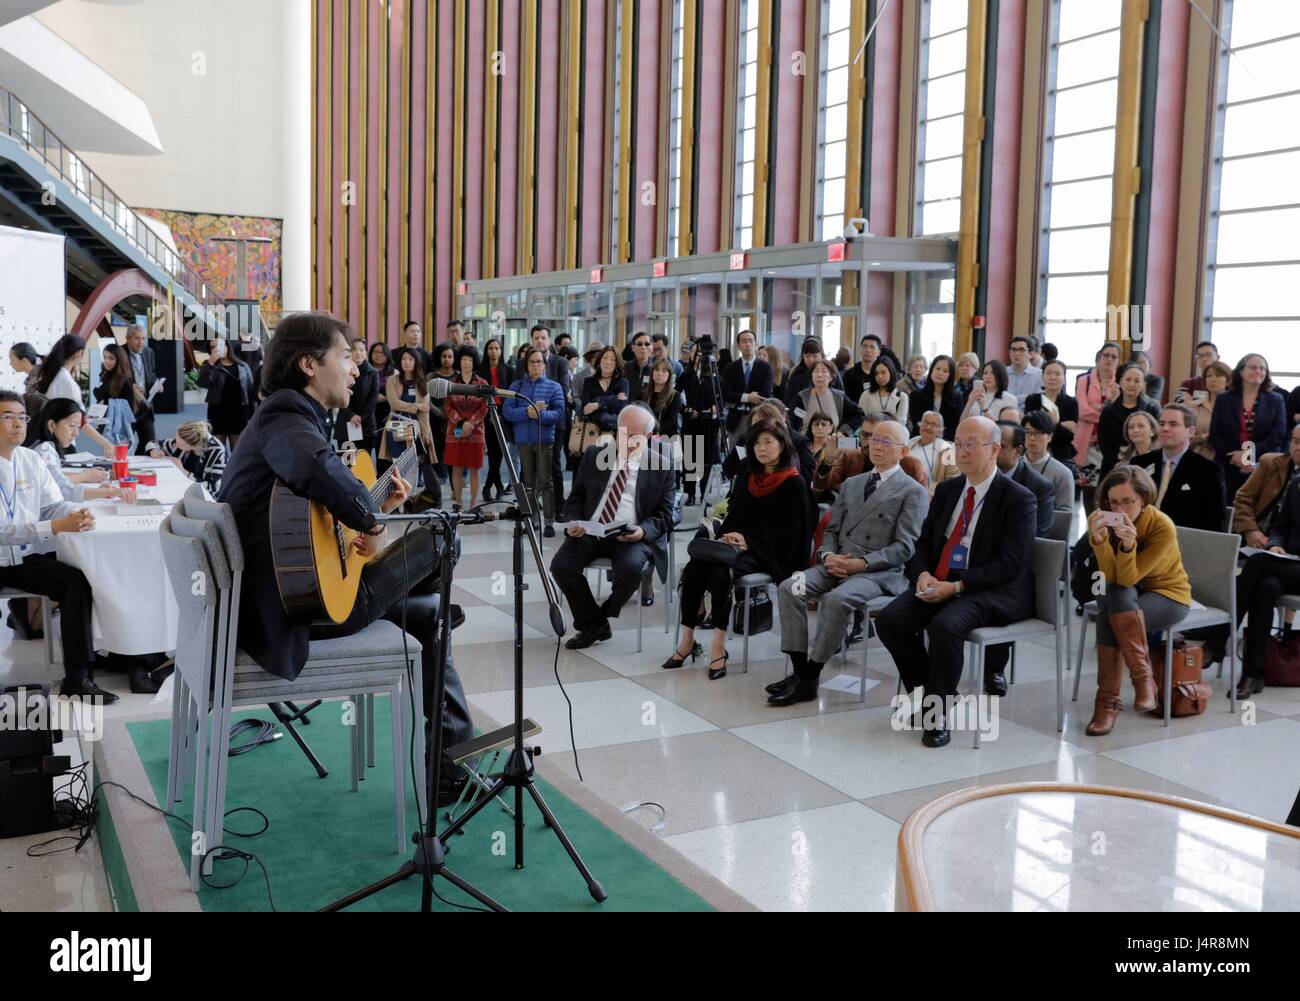 United Nations, New York, USA, May 12 2017 - PEACE IS a Concert by Shiro Otake honoring Argentina guitar player Atahualpa Yupanqui today at the UN Headquarters in New York. Photo: Luiz Rampelotto/EuropaNewswire | usage worldwide Stock Photo